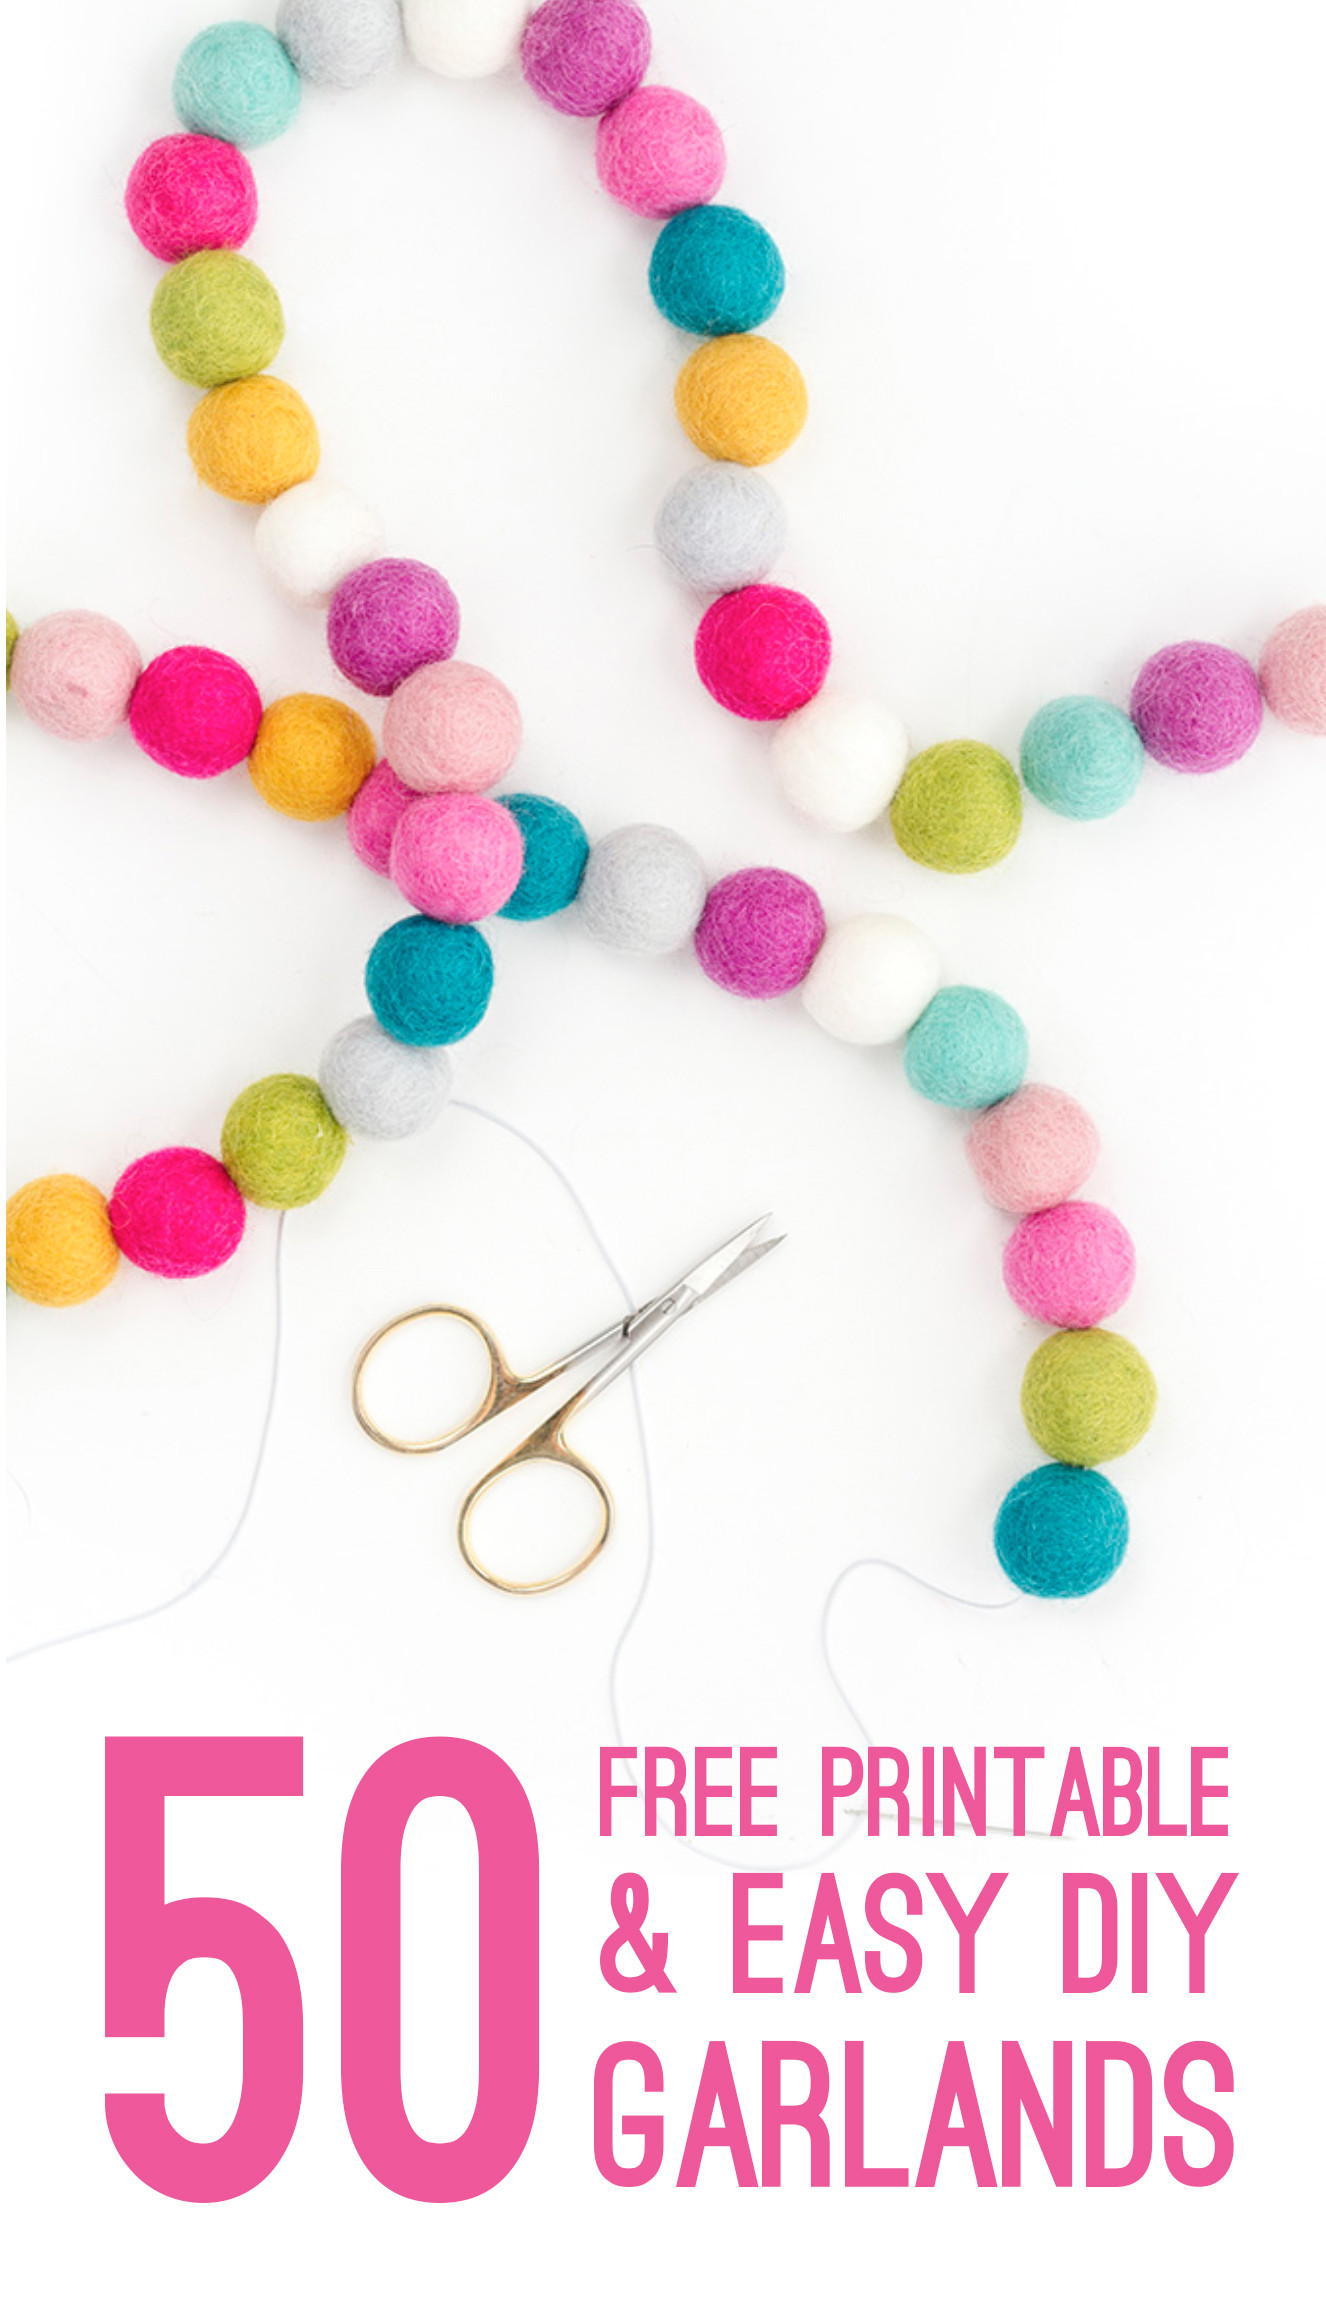 Free Printable Birthday Decorations
 50 FREE PRINTABLE GARLANDS AND DIY BANNERS YOU NEED FOR